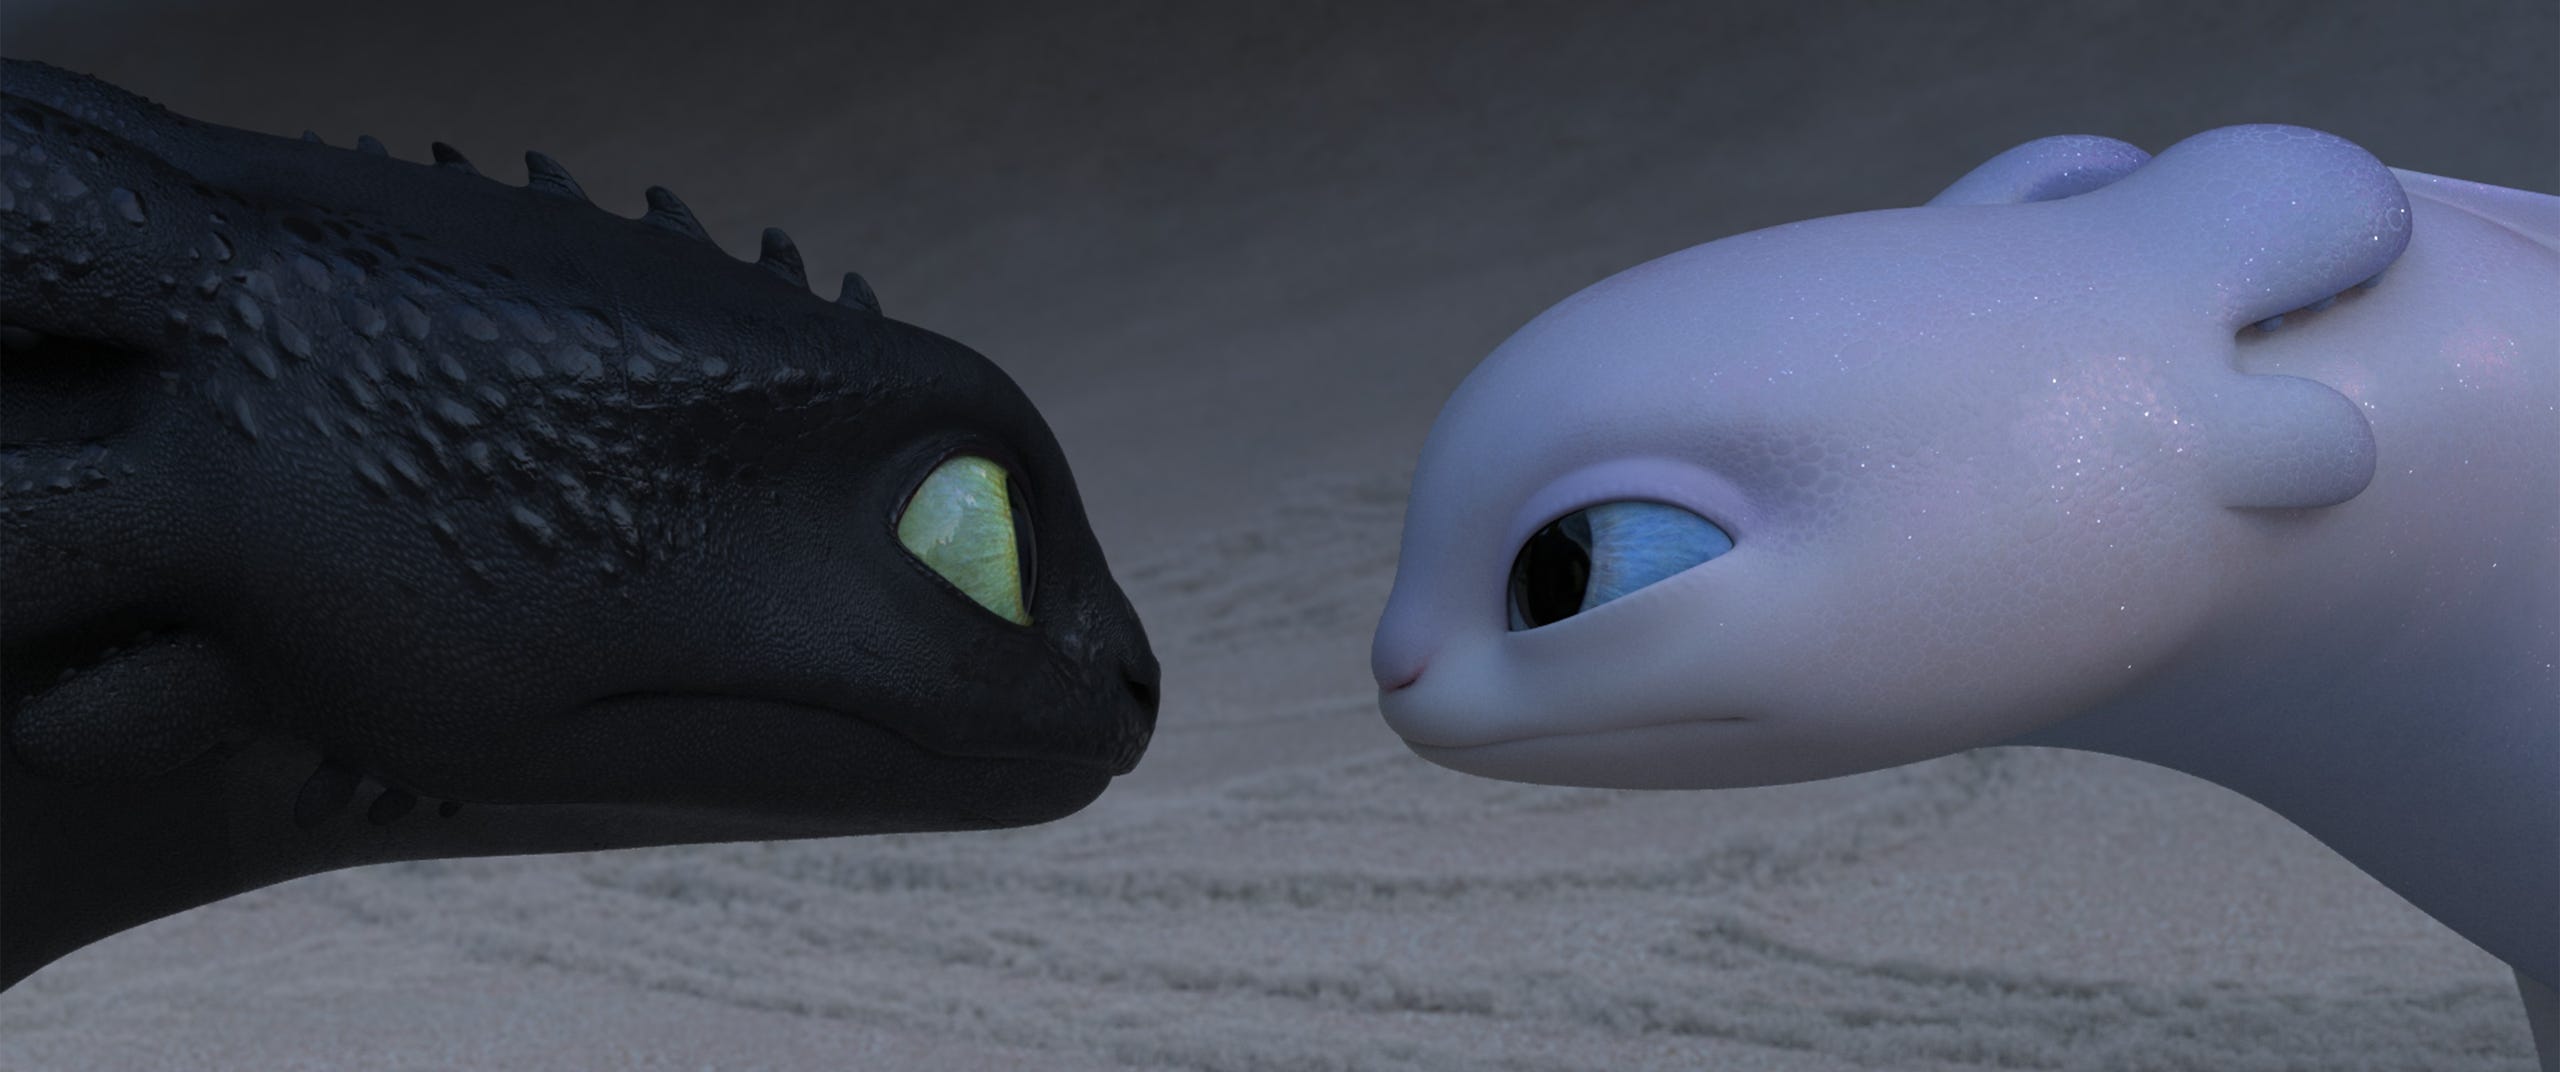 Light Fury Brings Heat To How To Train Your Dragon The